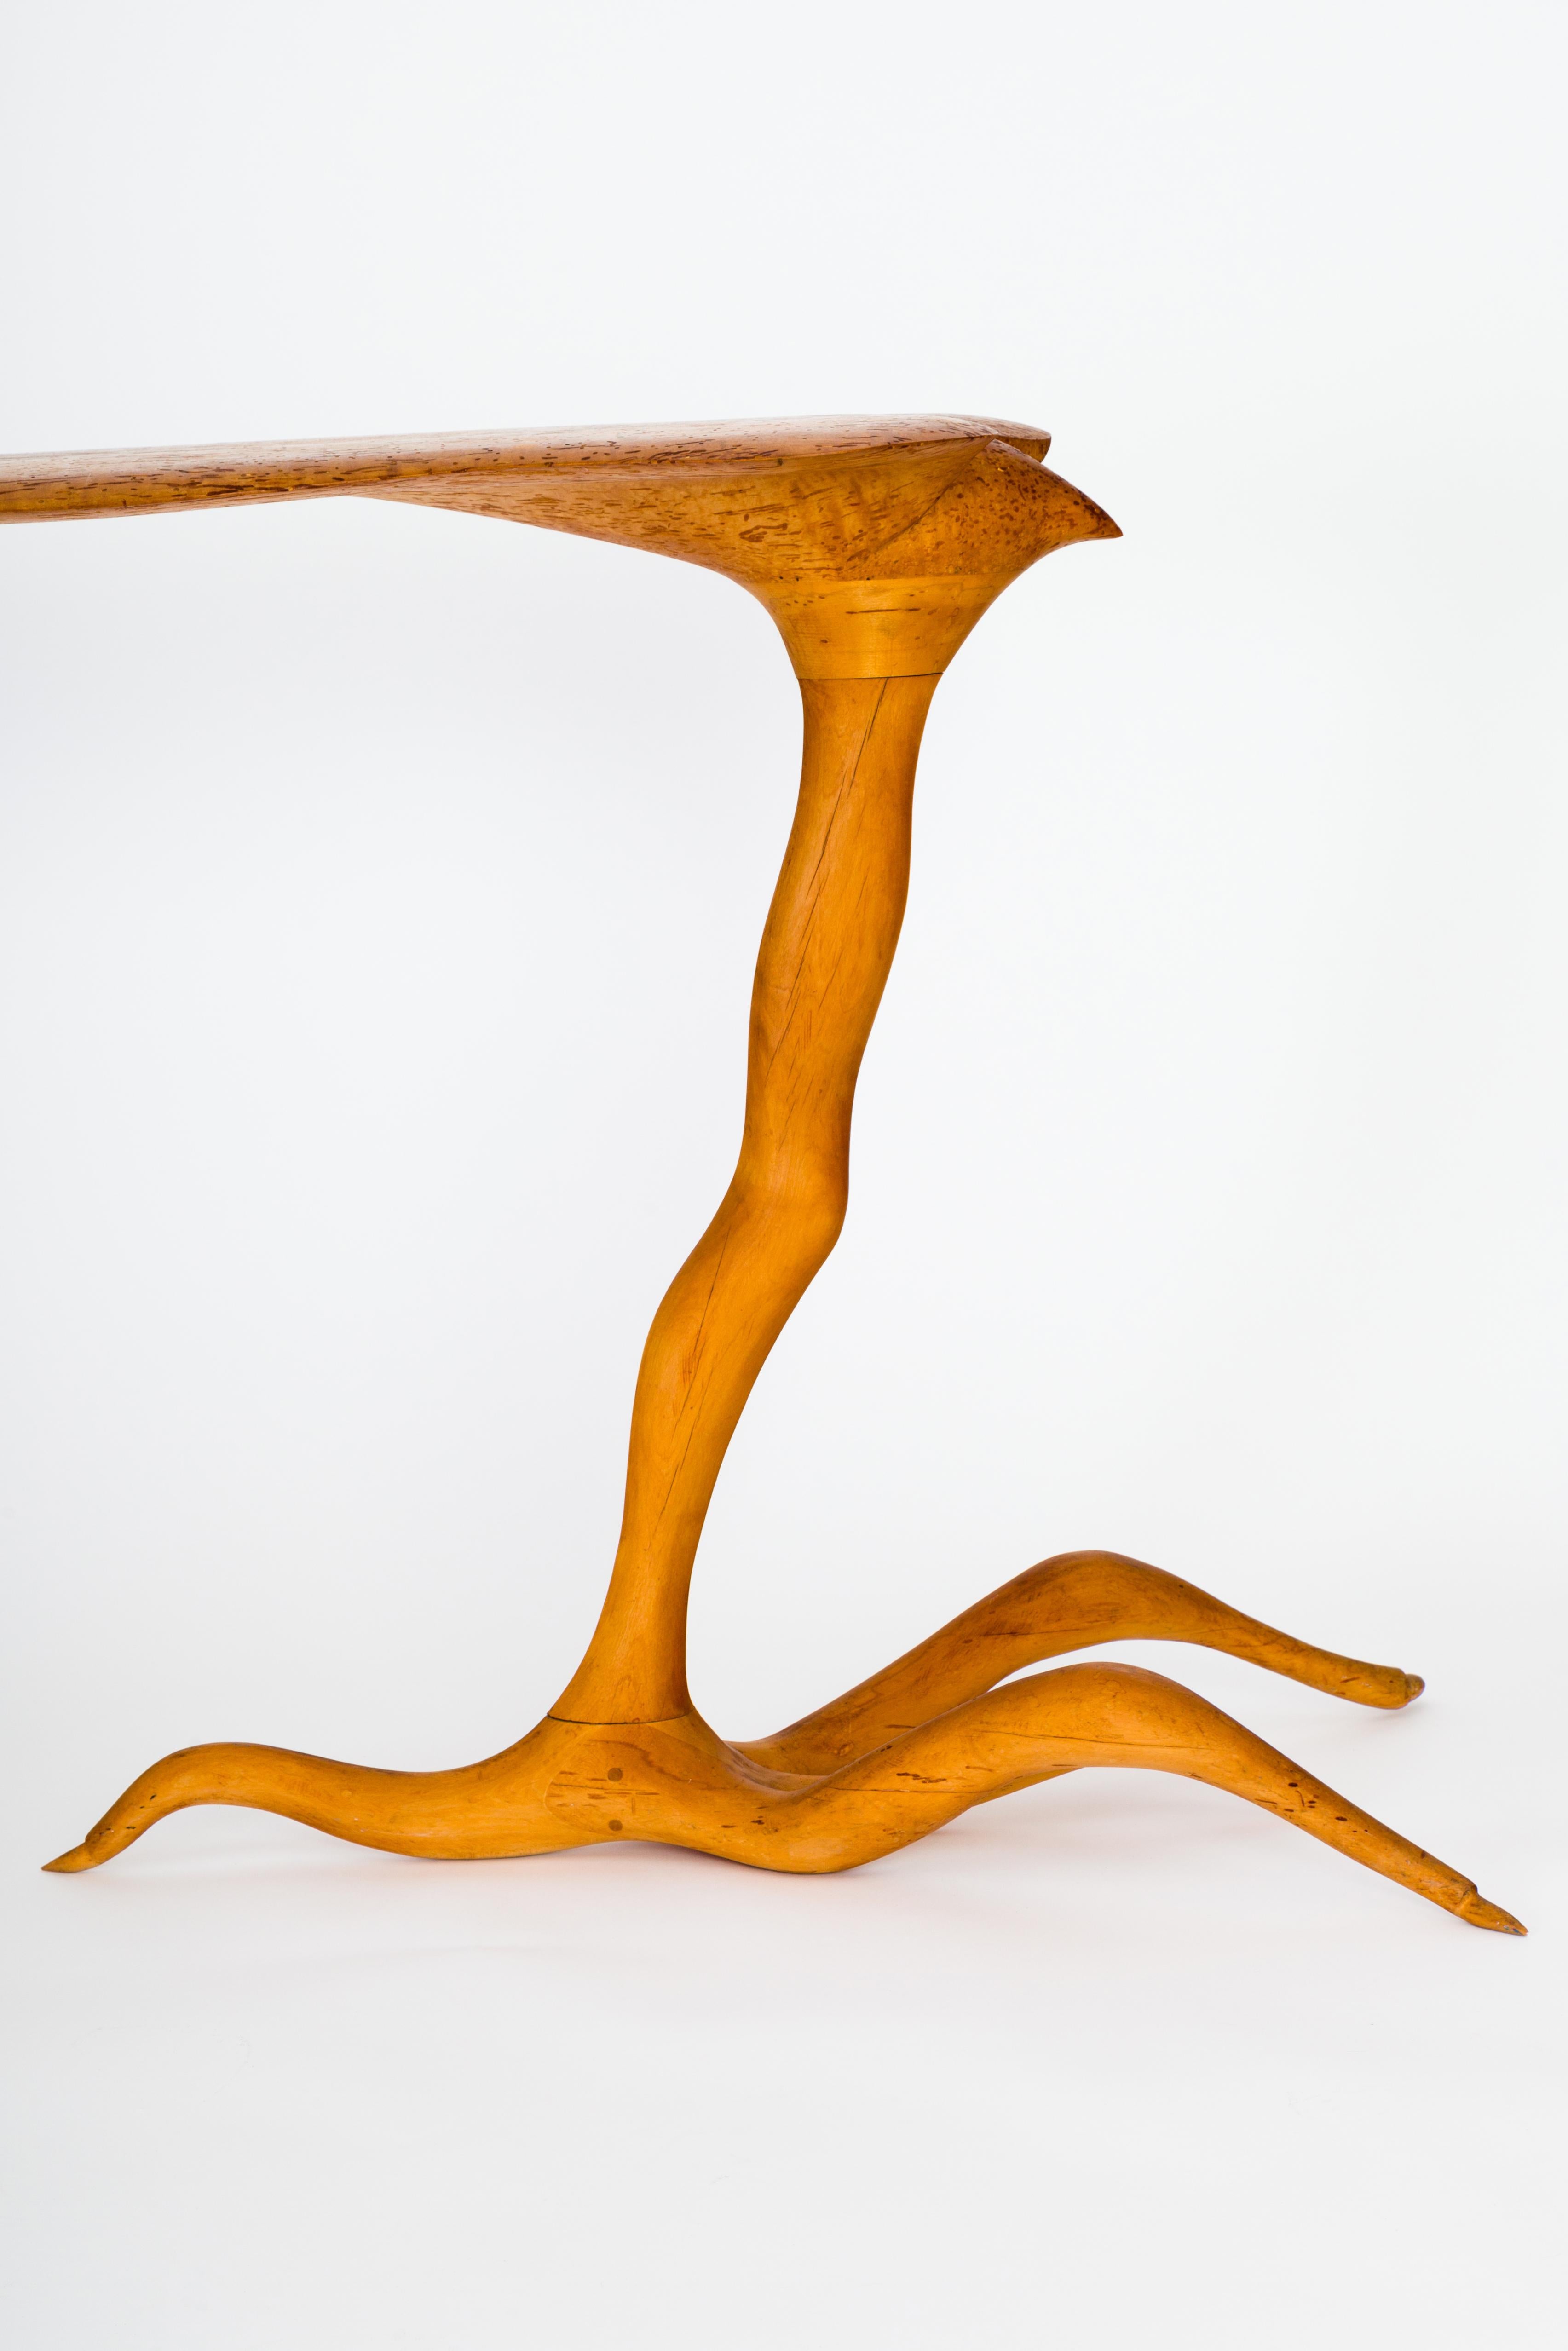 Hand-Carved One-Off American Studio Surreal Console Table in Maple by Andrew J Willner, 1976 For Sale